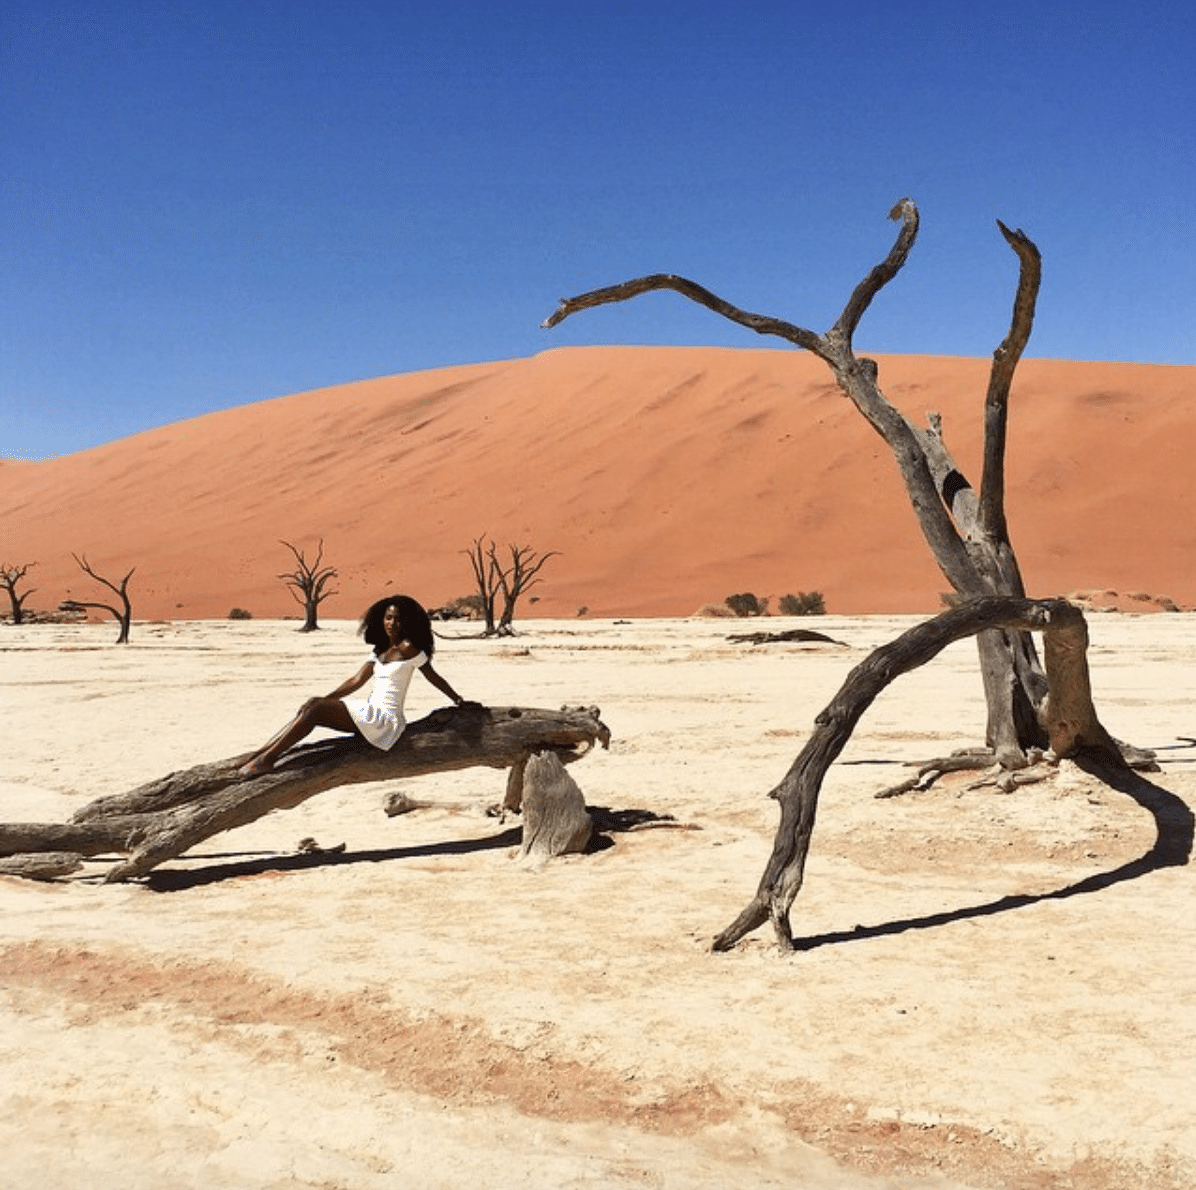 4 Reasons Namibia Should Be on Your Travel Wish List